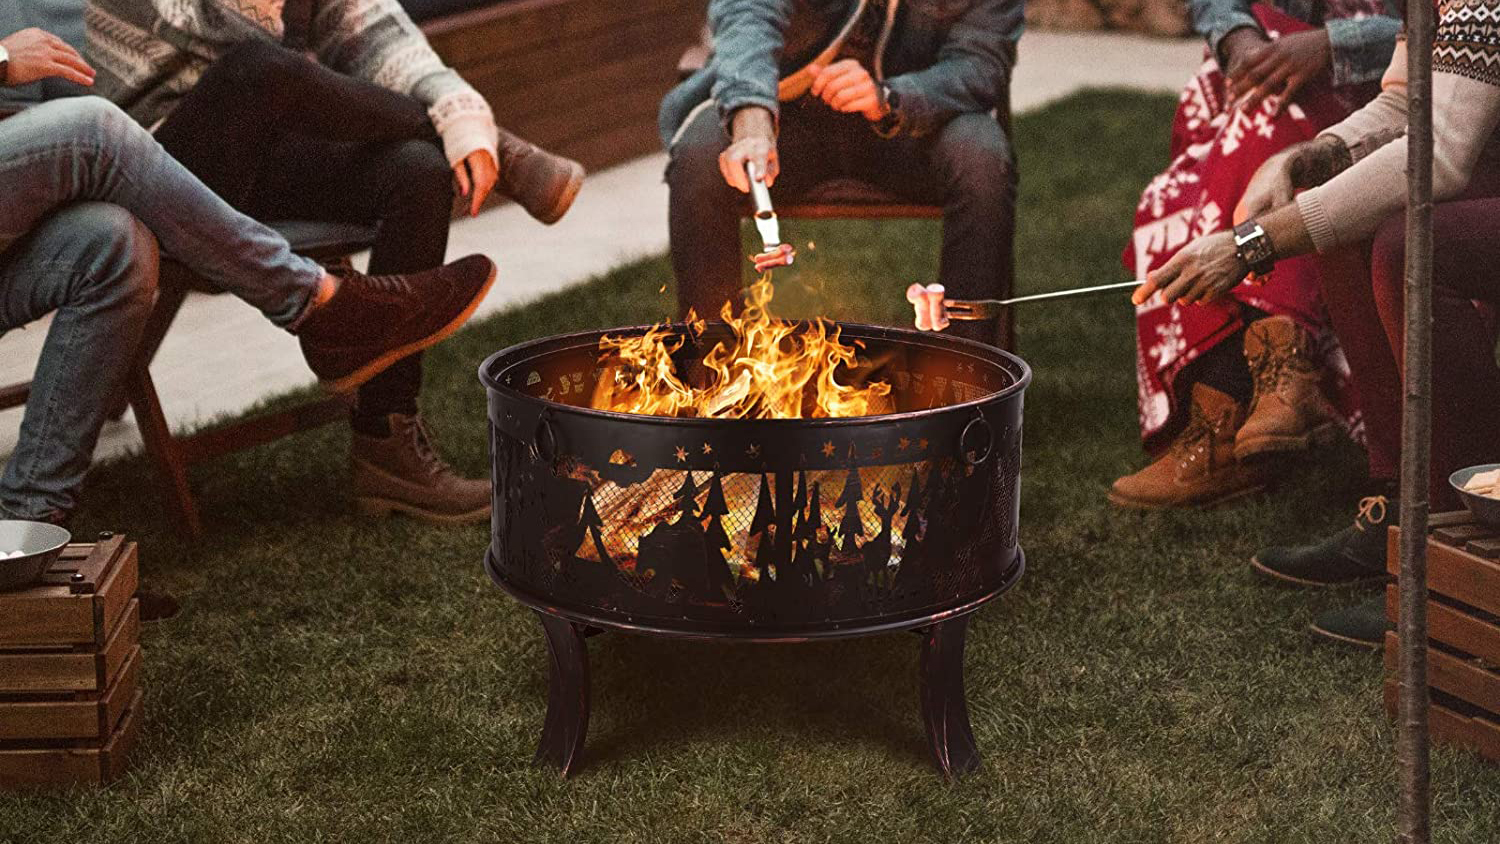 Best Fire Pit 2021 Keep Warm Outdoors T3, Fuoco Fire Pit